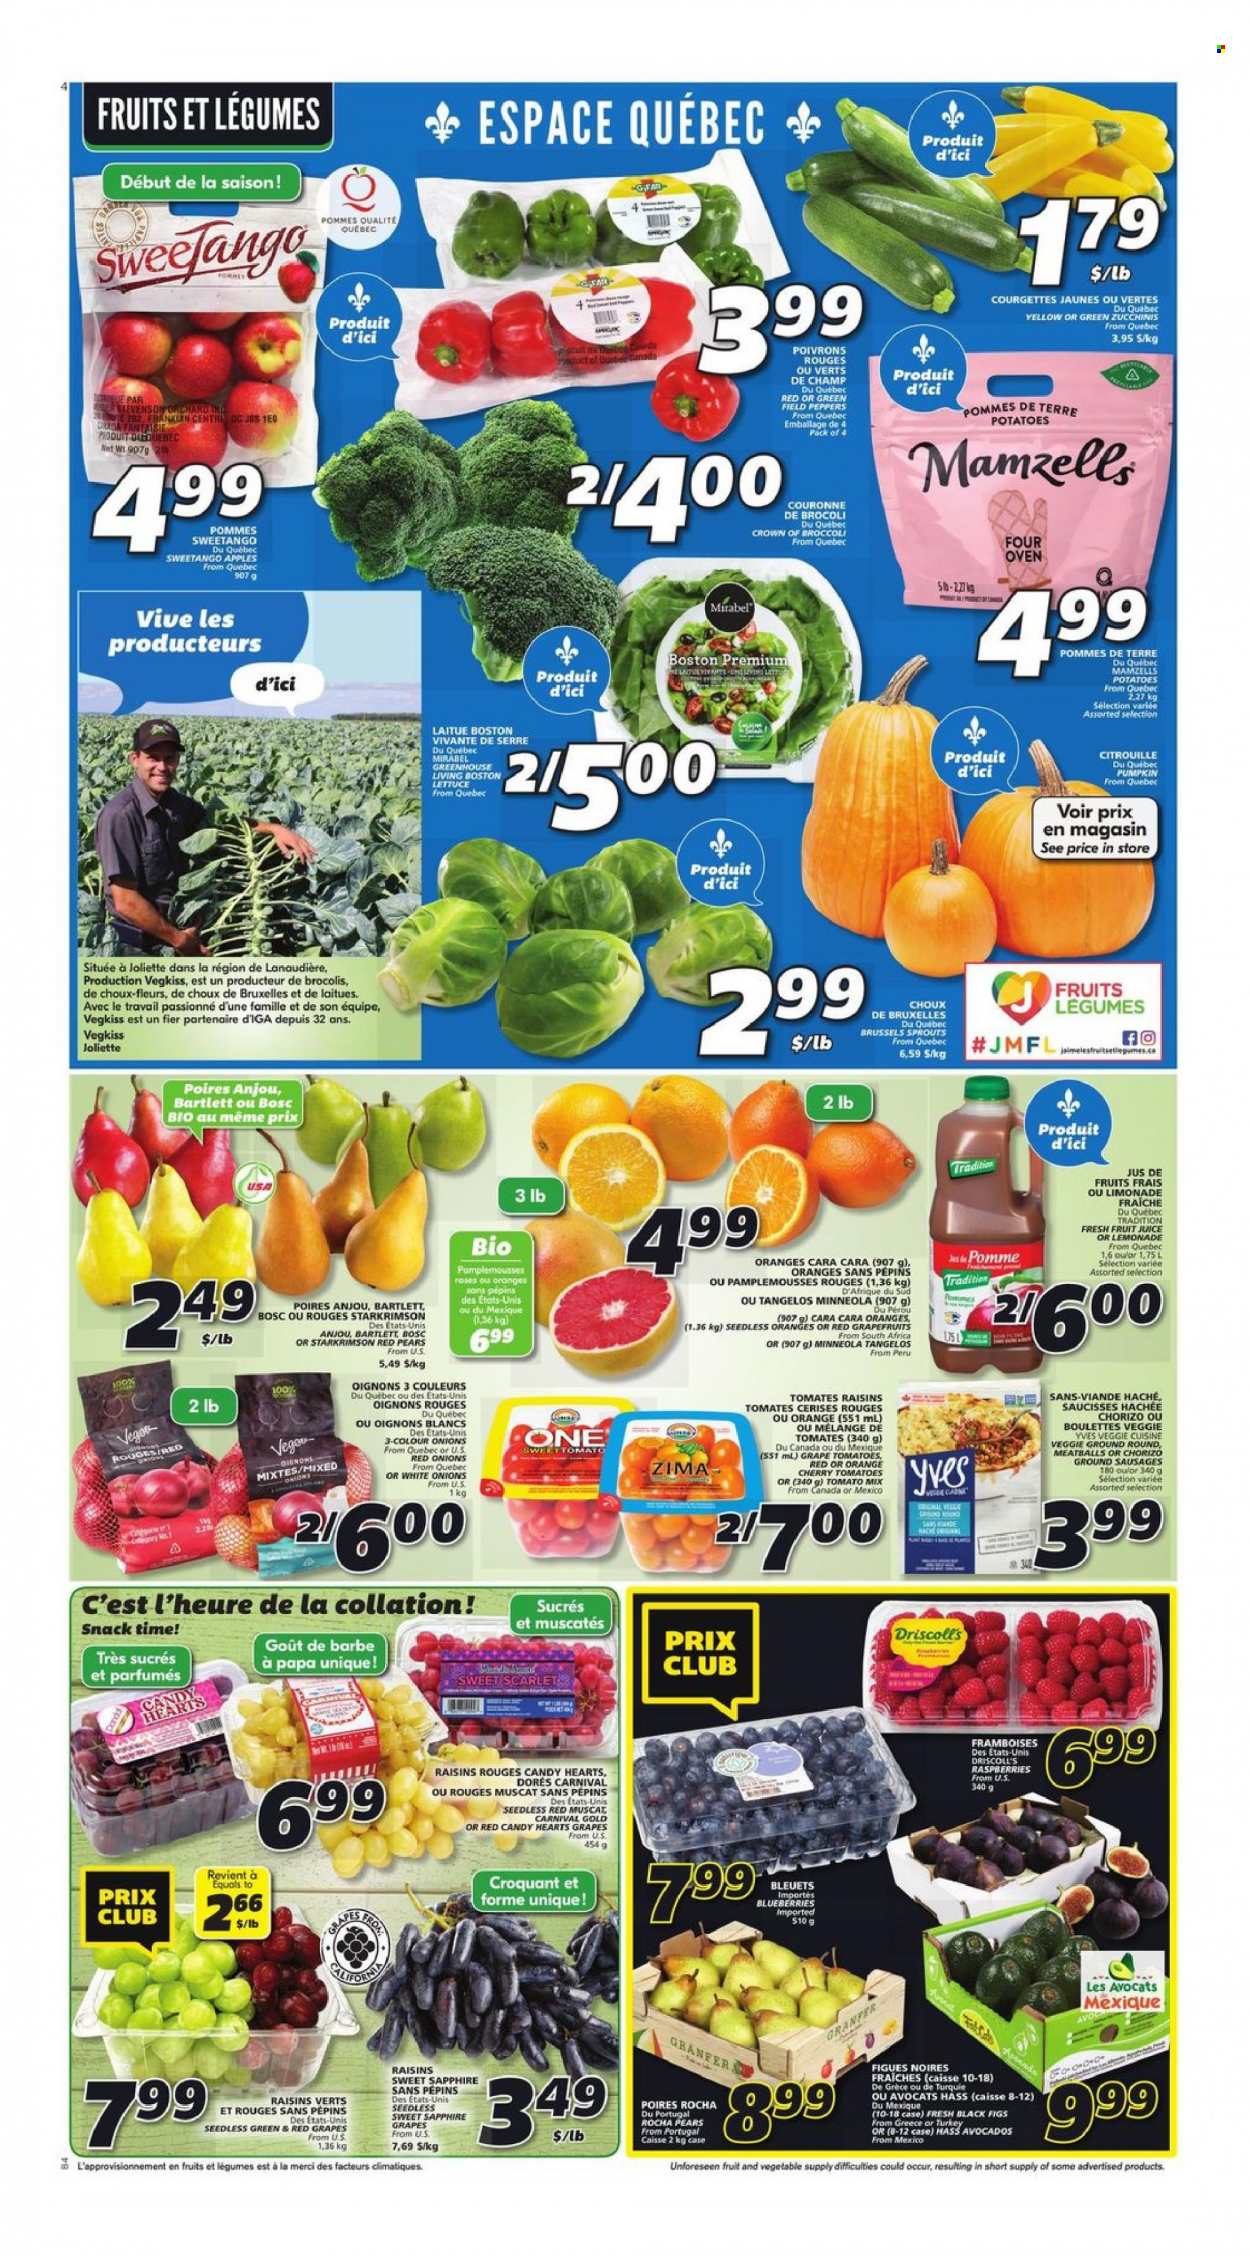 thumbnail - IGA Flyer - September 23, 2021 - September 29, 2021 - Sales products - broccoli, red onions, tomatoes, potatoes, pumpkin, onion, lettuce, peppers, brussel sprouts, apples, avocado, blueberries, figs, tangelos, cherries, pears, meatballs, sausage, snack, Merci, dried fruit, lemonade, juice, fruit juice, raisins, chorizo, oranges. Page 3.